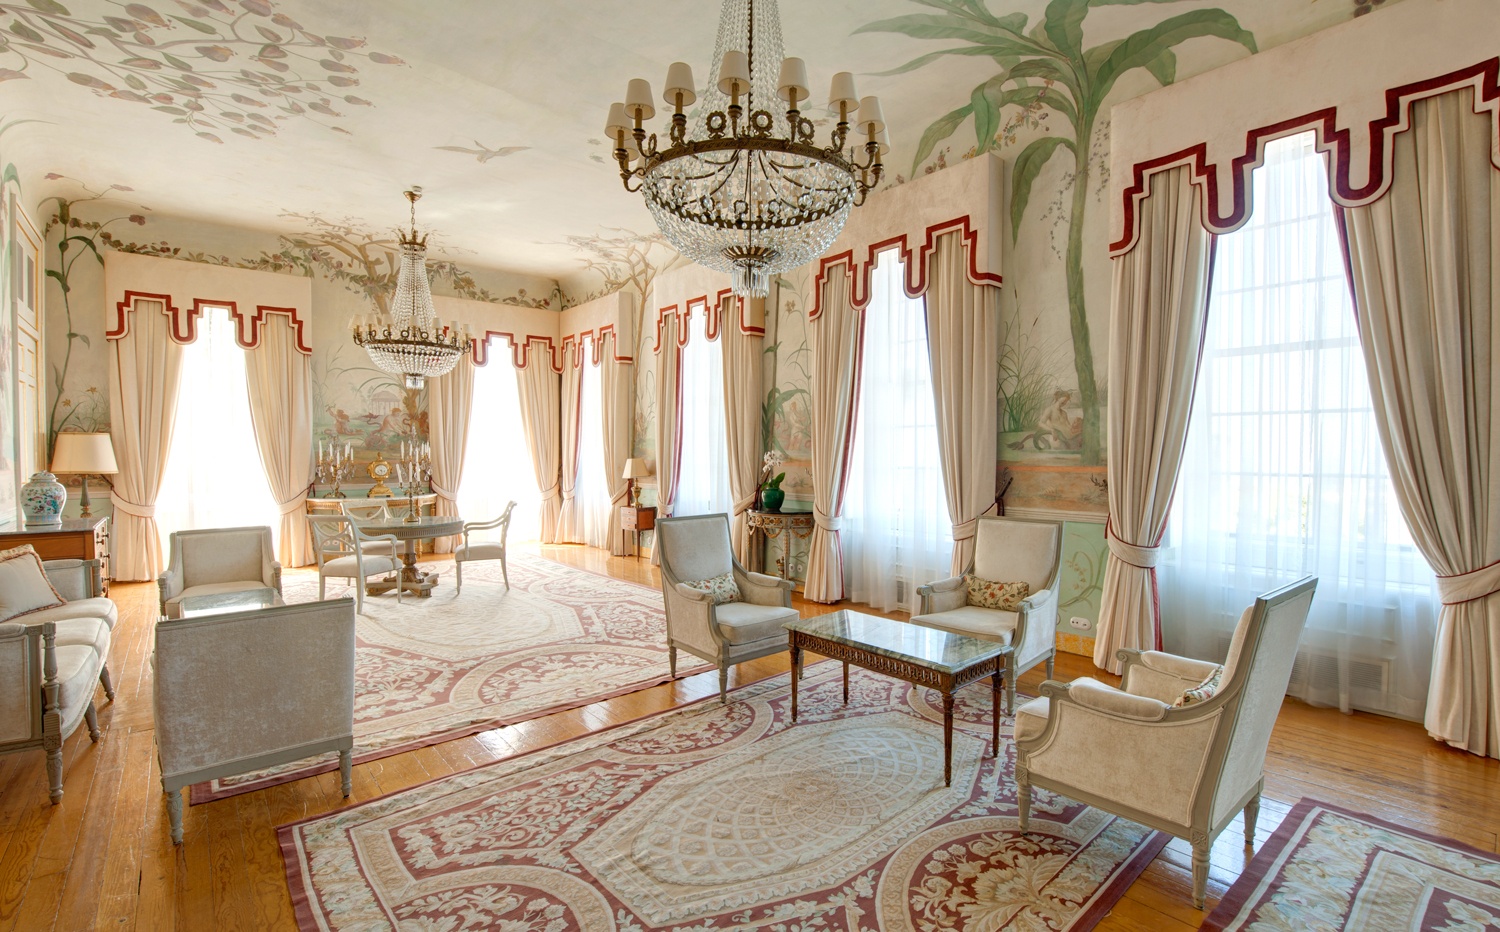 8 Former Palaces Turned Into Luxury Hotels Galerie